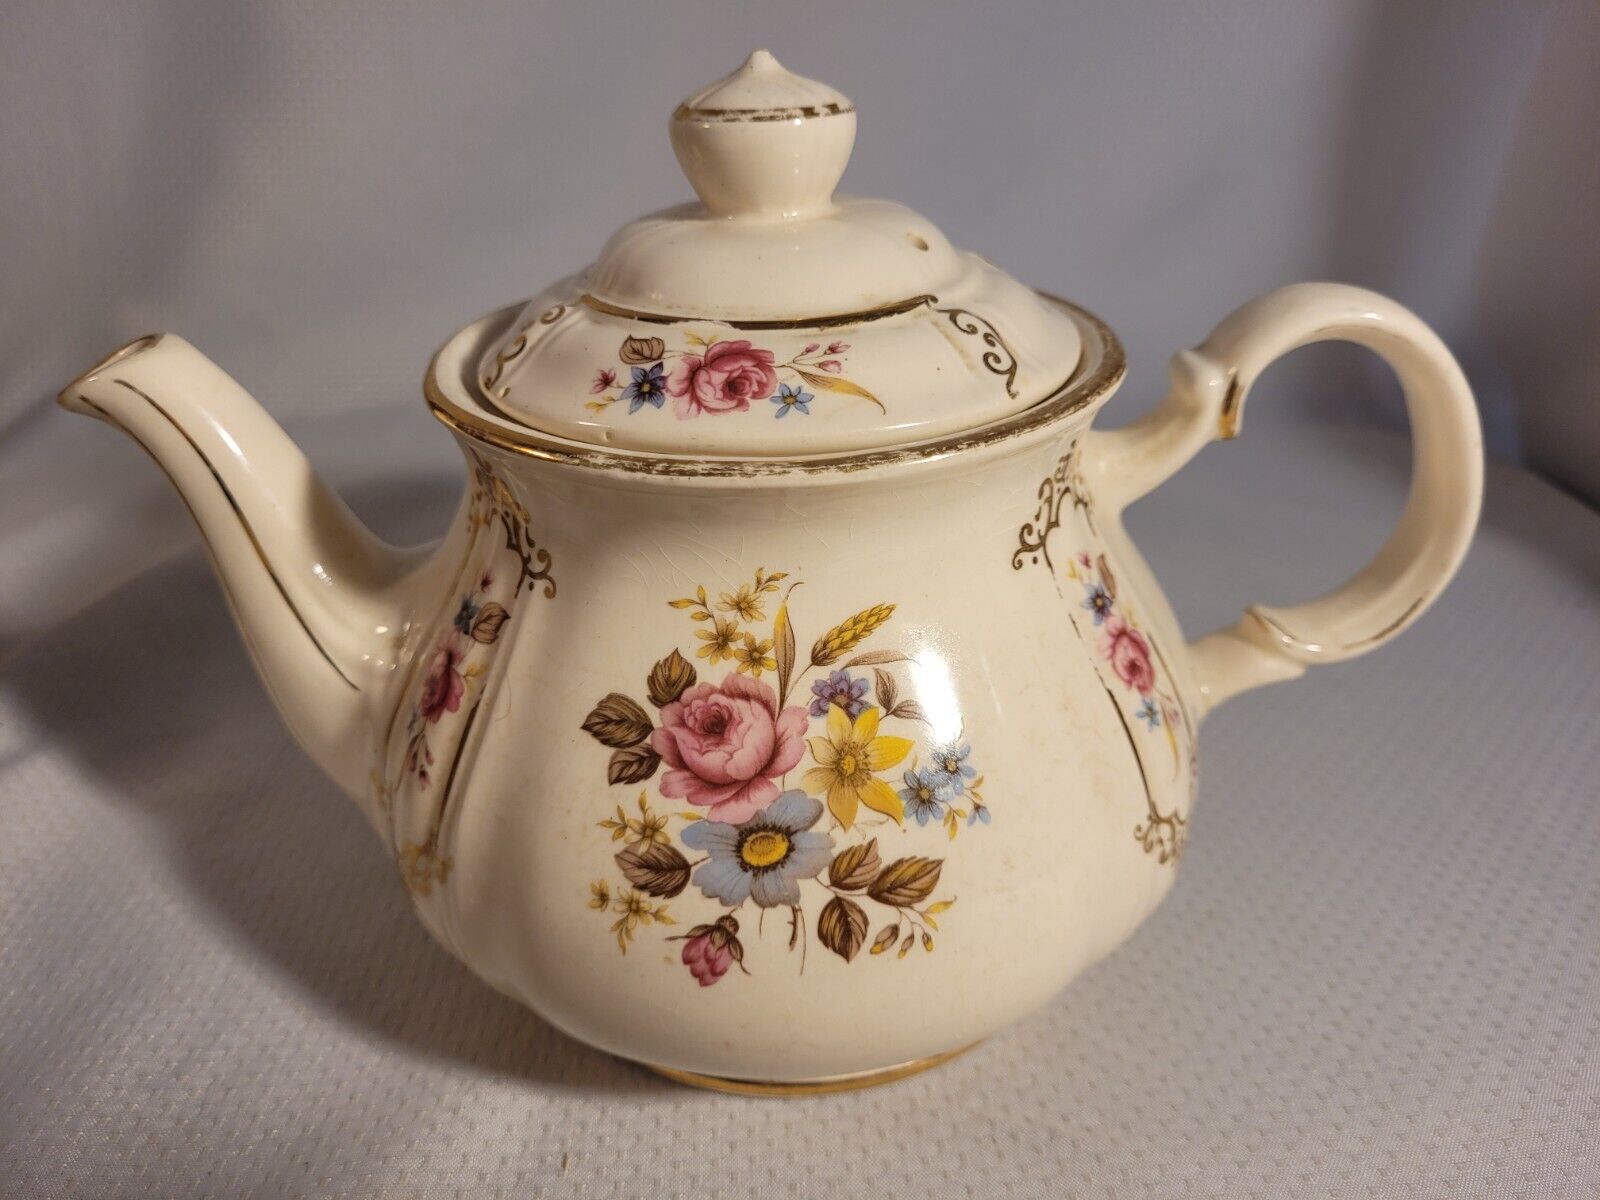 STAFFORDSHIRE FINE CHINA TEAPOT - Saller- MADE IN ENGLAND